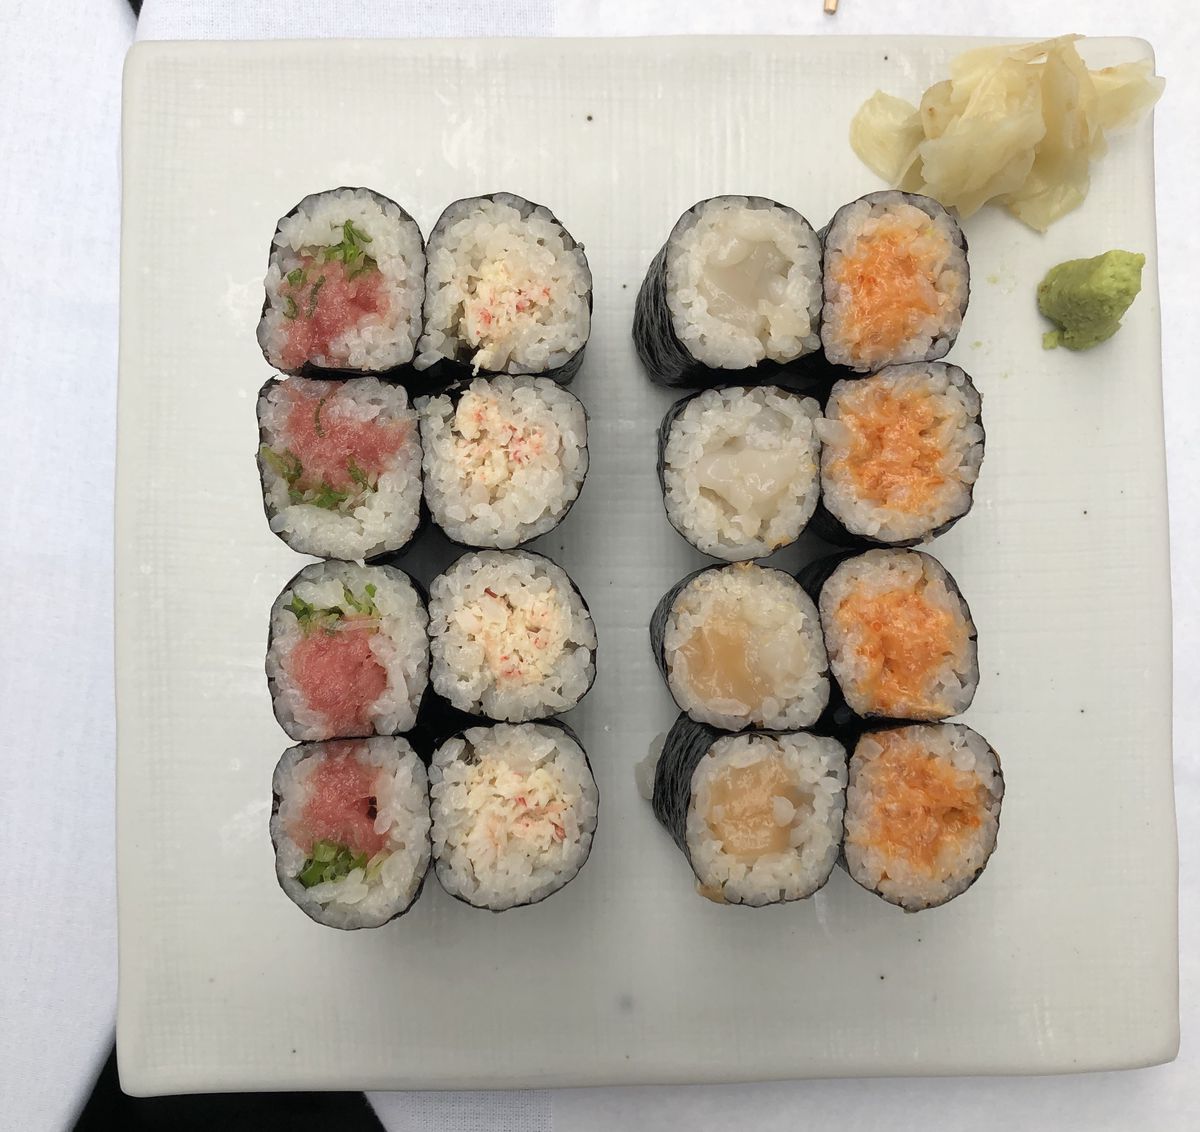 A rectangular white plate with rows of sushi placed on top of it